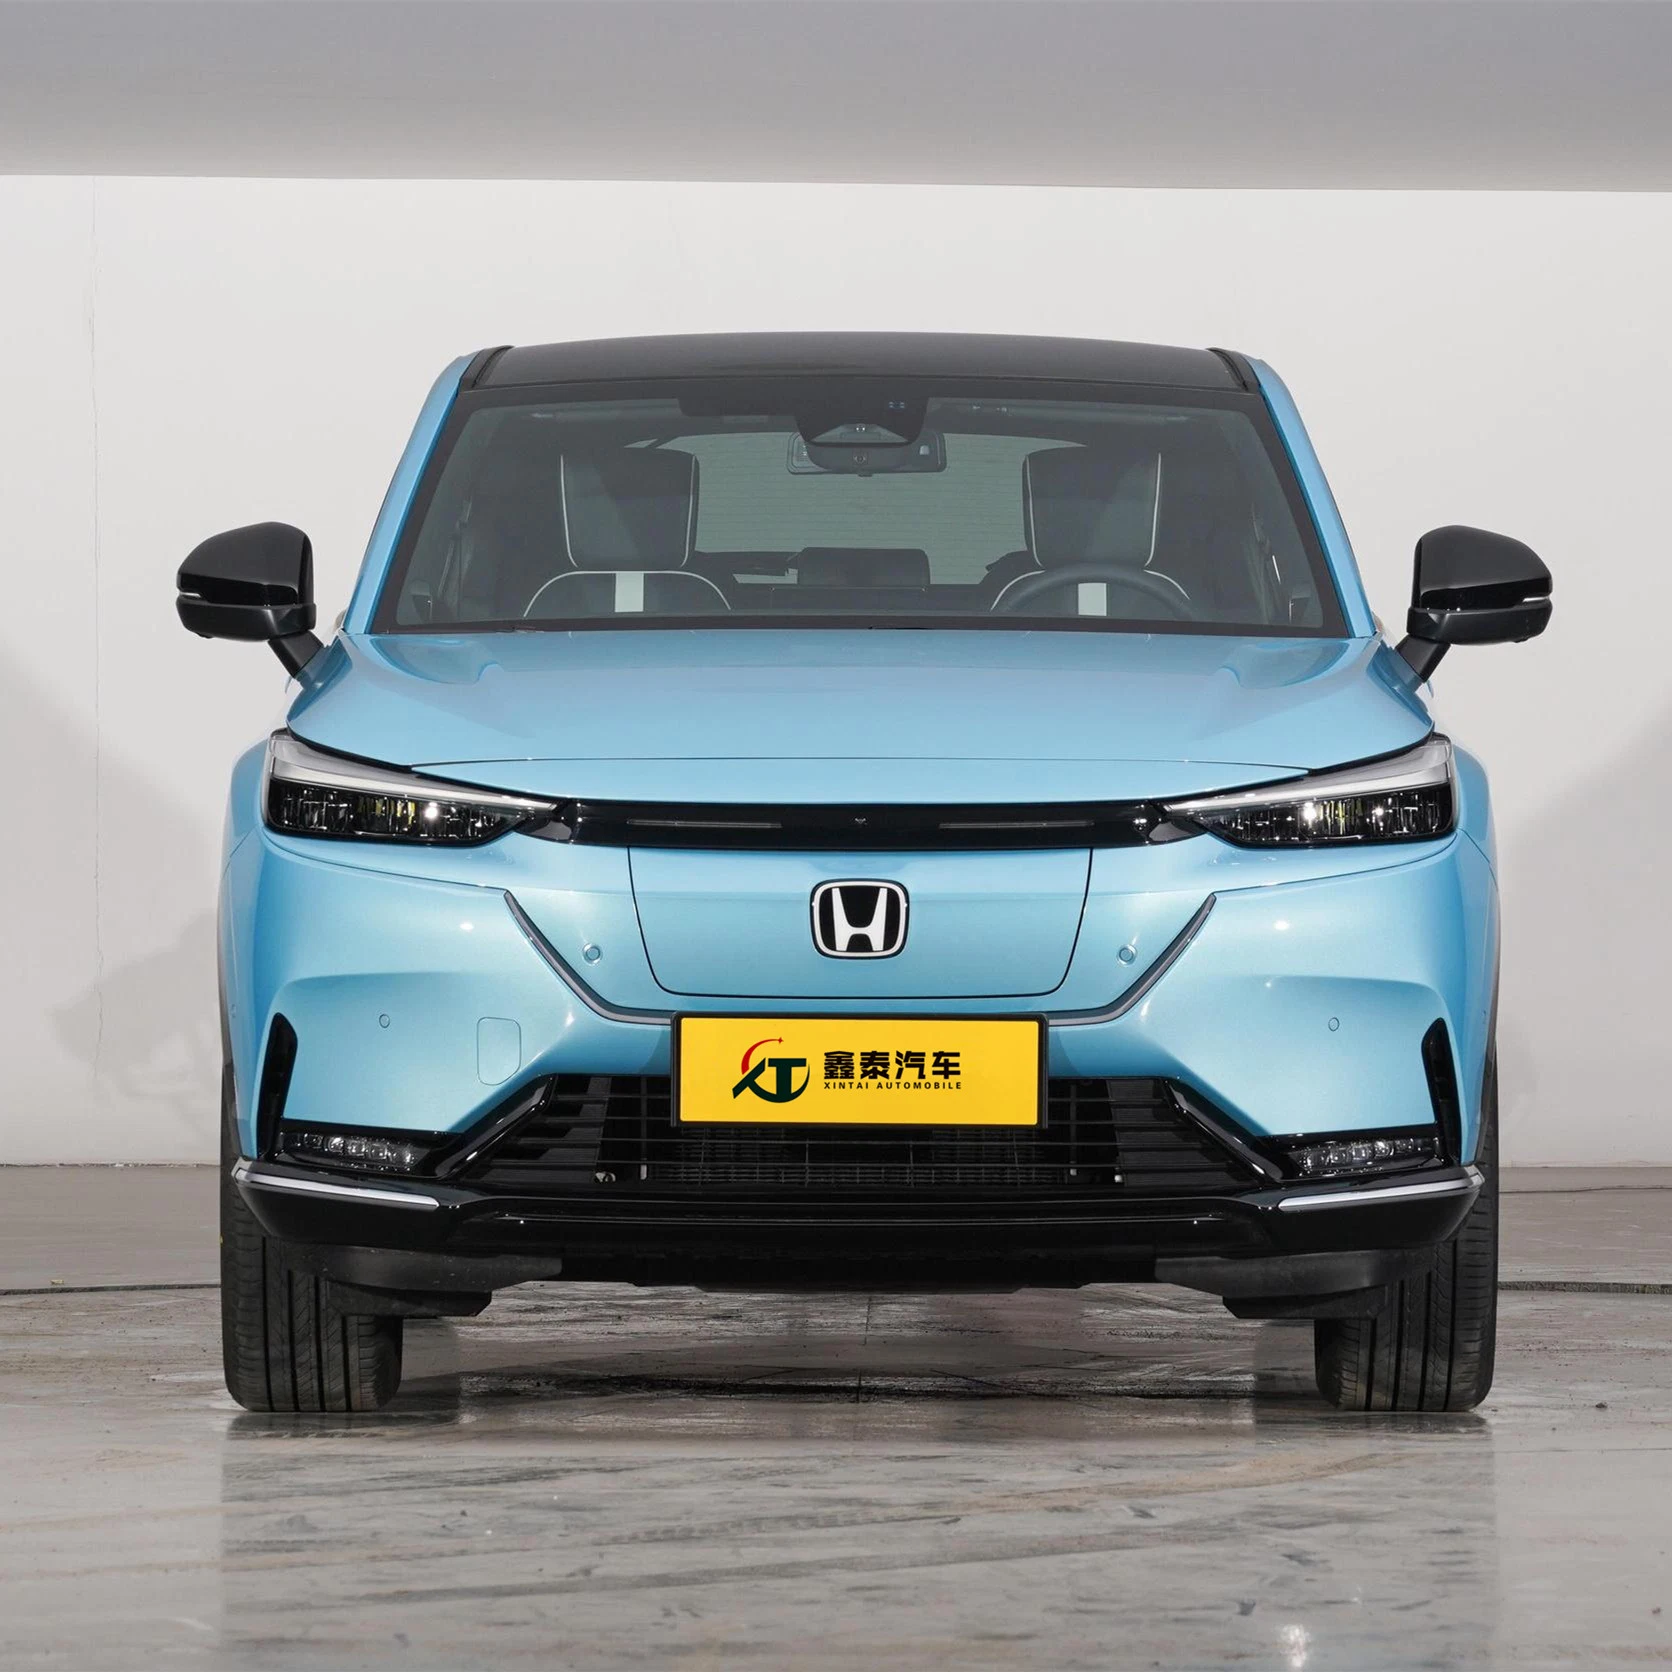 Chinese Honda Car Bev Closed Ens1 Electrical SUV Electric Vehicle Used EV Car with Cheap Price Car E: Ns1 Minicar